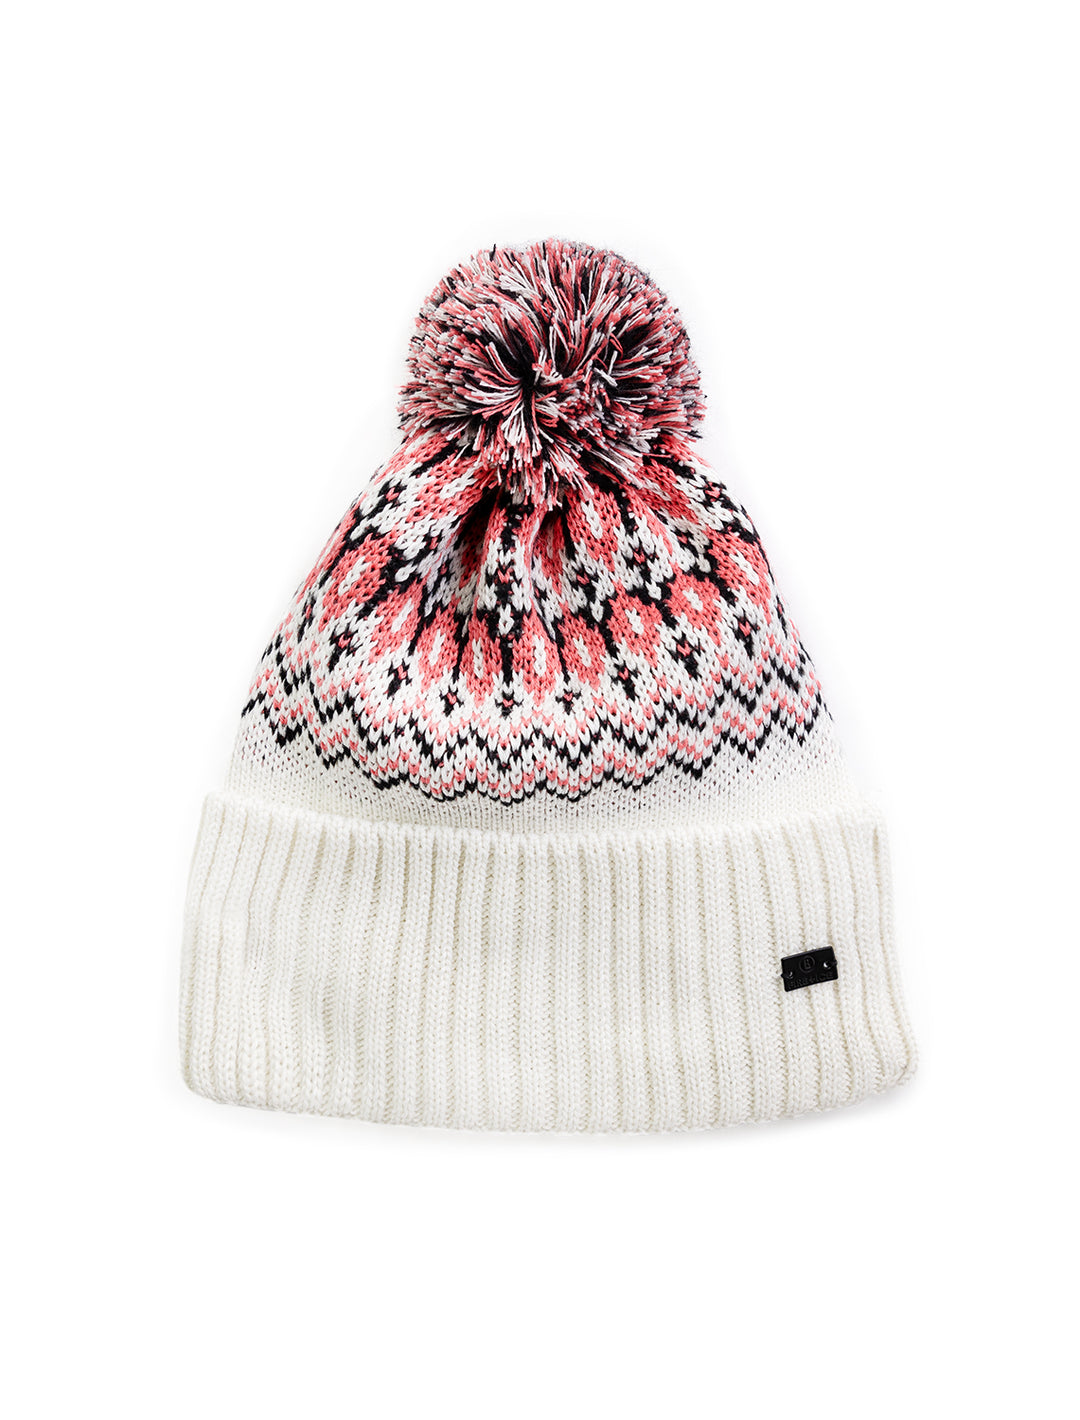 Front view of Bogner's leora hat in off-white.